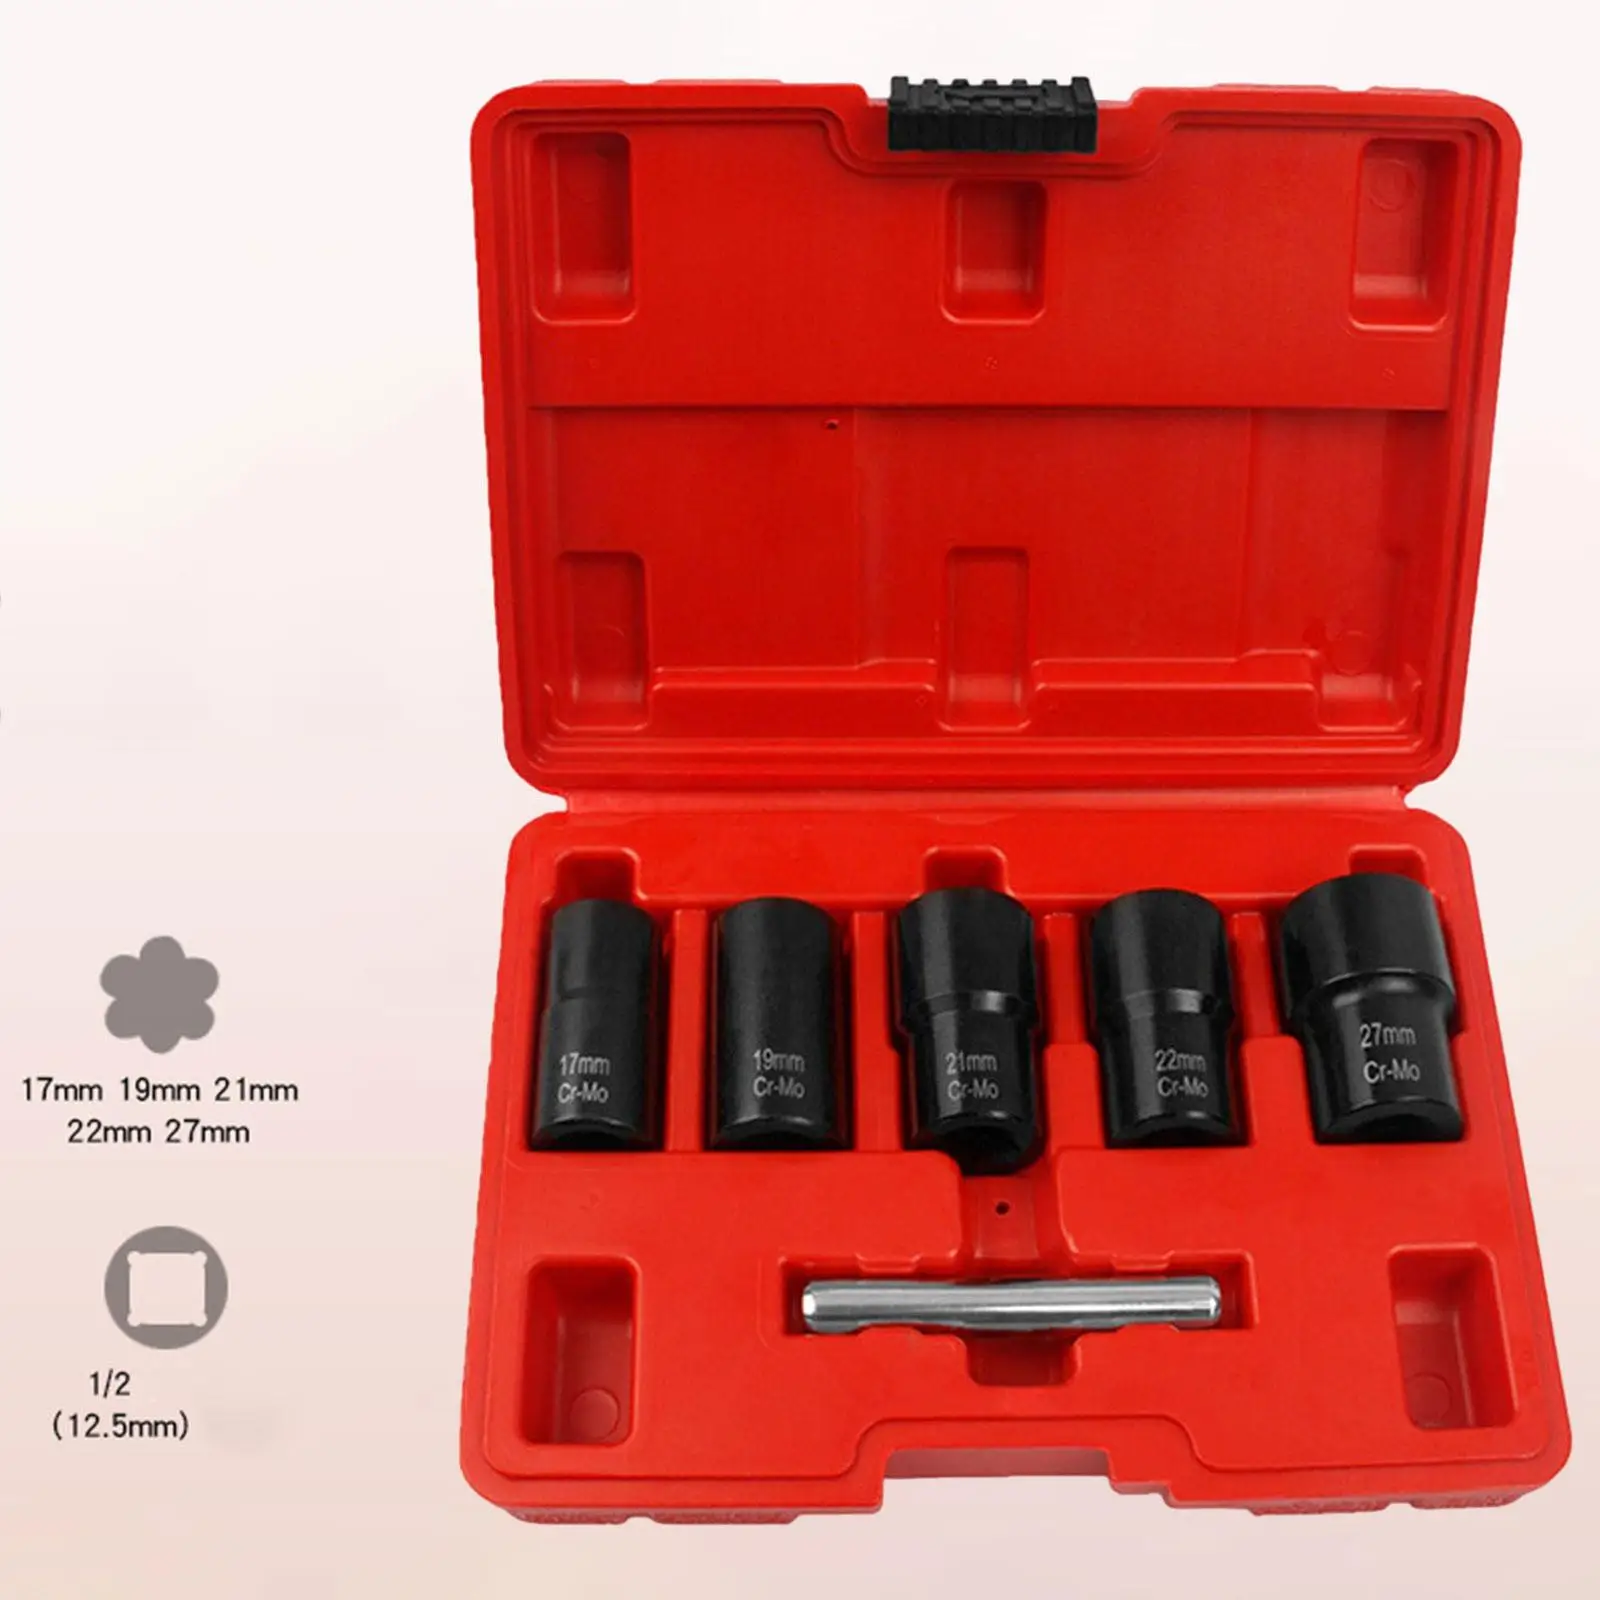 6x Socket Wrench Set Deep Sockets 6 Point 17mm-27mm for 1/2